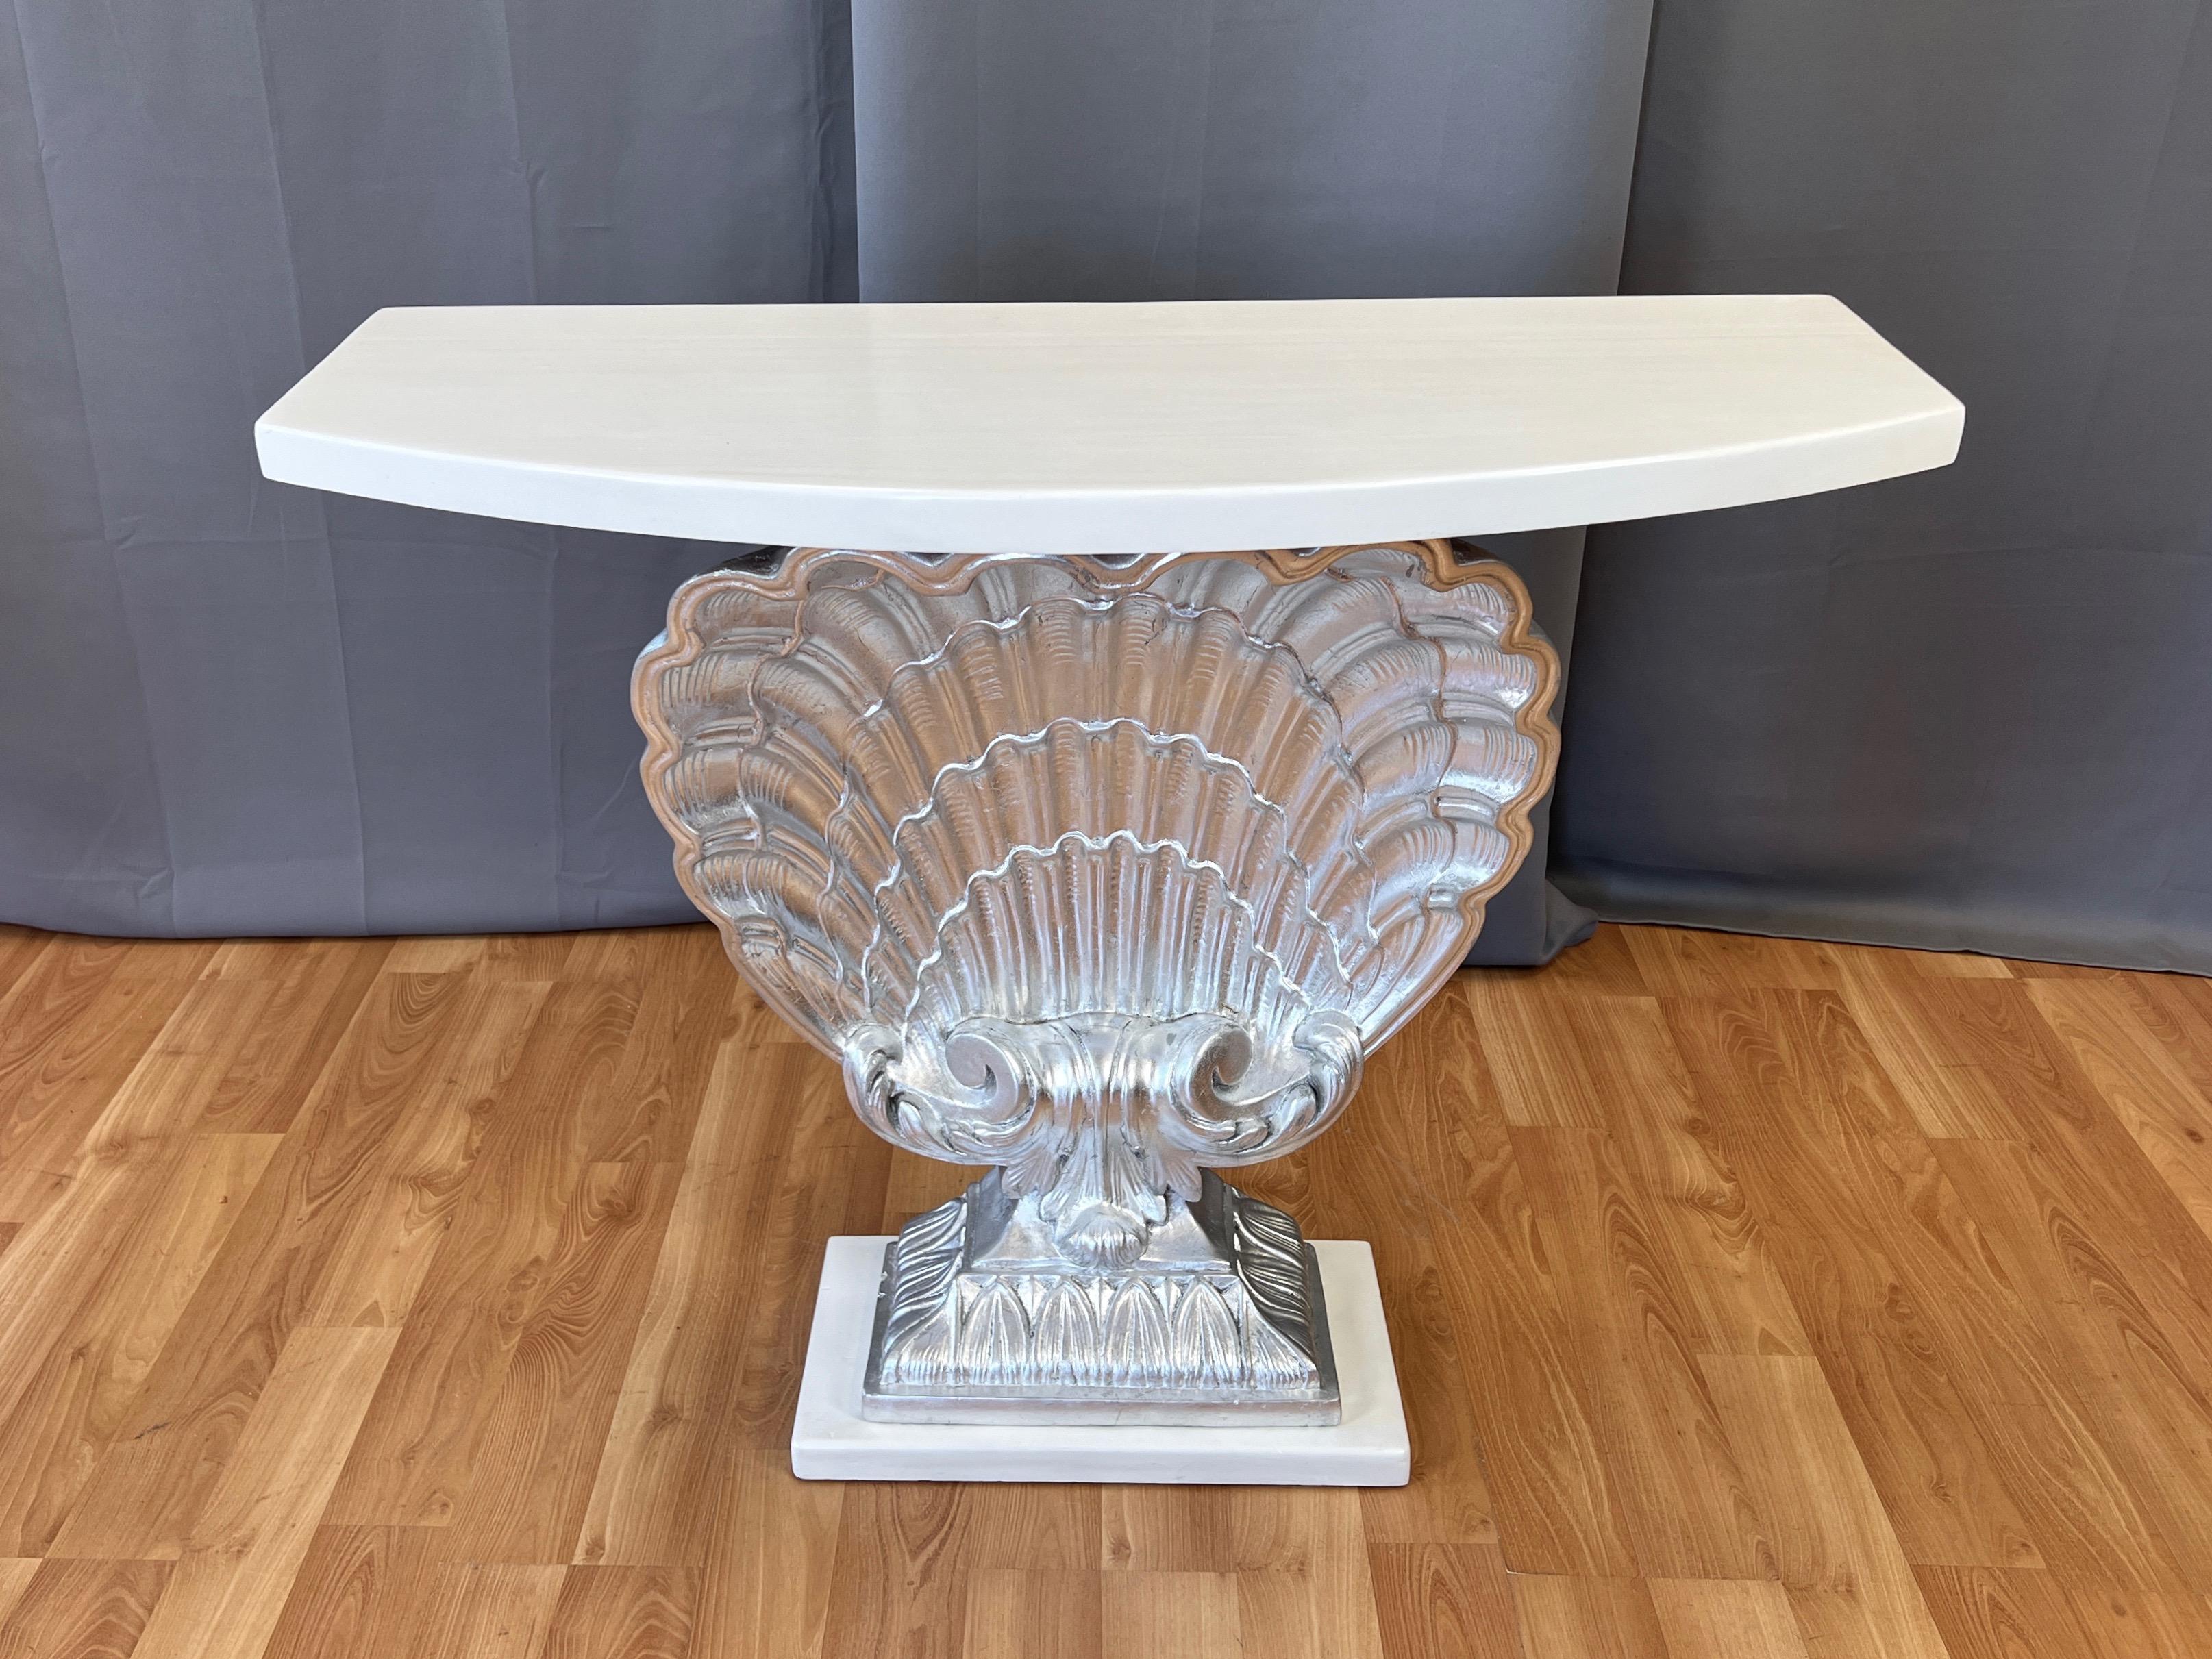 A stunning 1940s Hollywood Regency silver-leafed shell console table with white lacquered top and base by Grosfeld House.

Exceptionally well-sculpted and exquisitely detailed monumental cast plaster scallop shell on integrated ornamental pedestal.